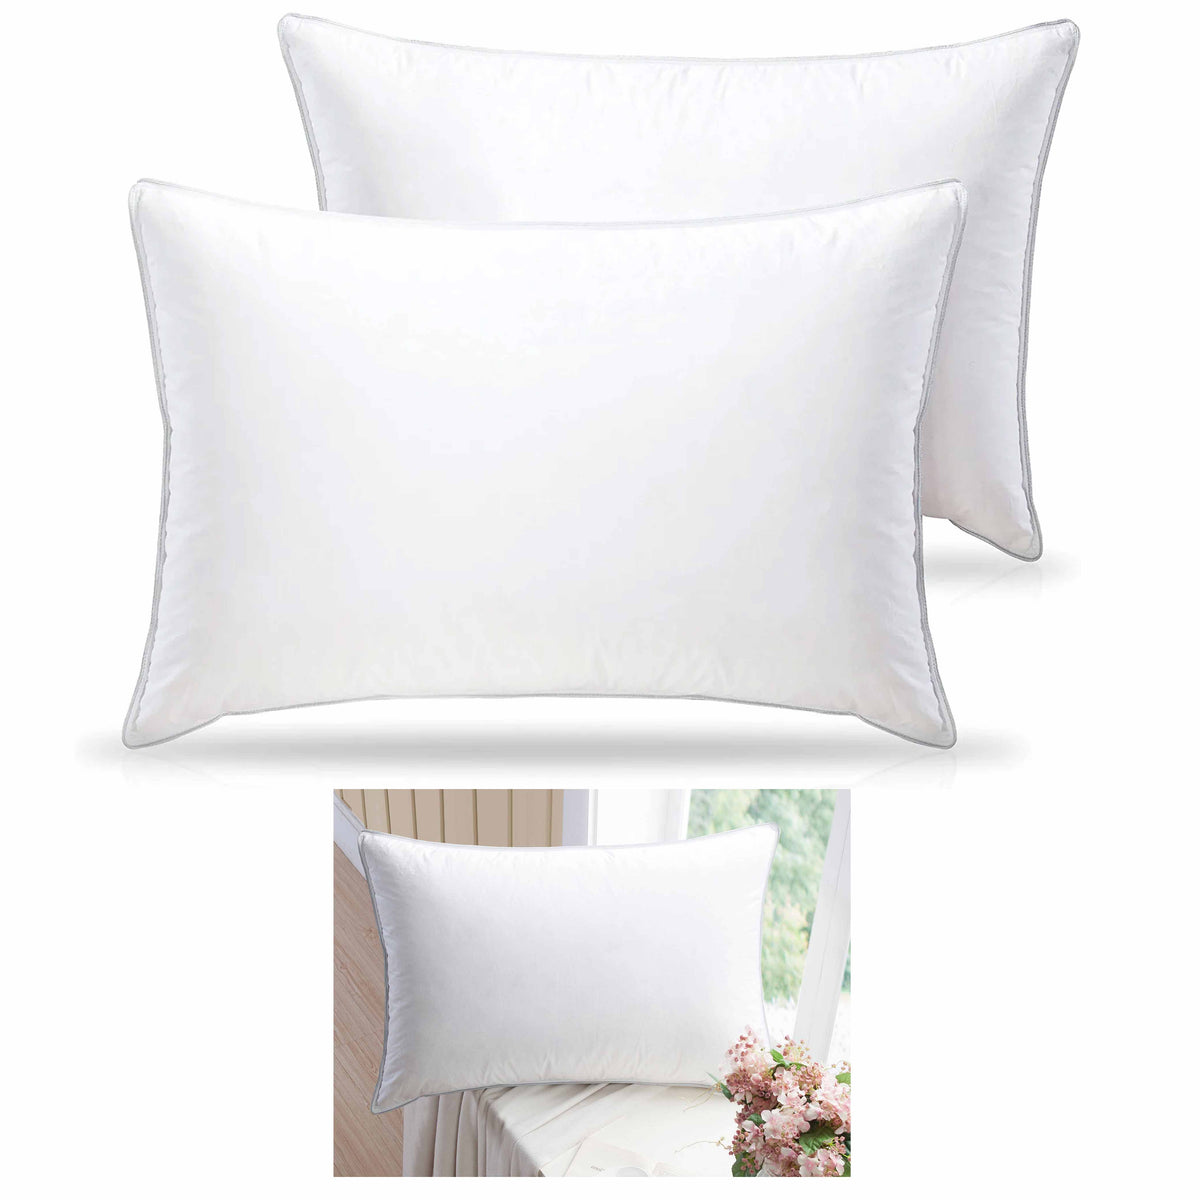 Weekender Pillows Weekender Compressed Pillow- 2-Pack (Queen) (Bed Pillows)  from Pampa Sleep Store